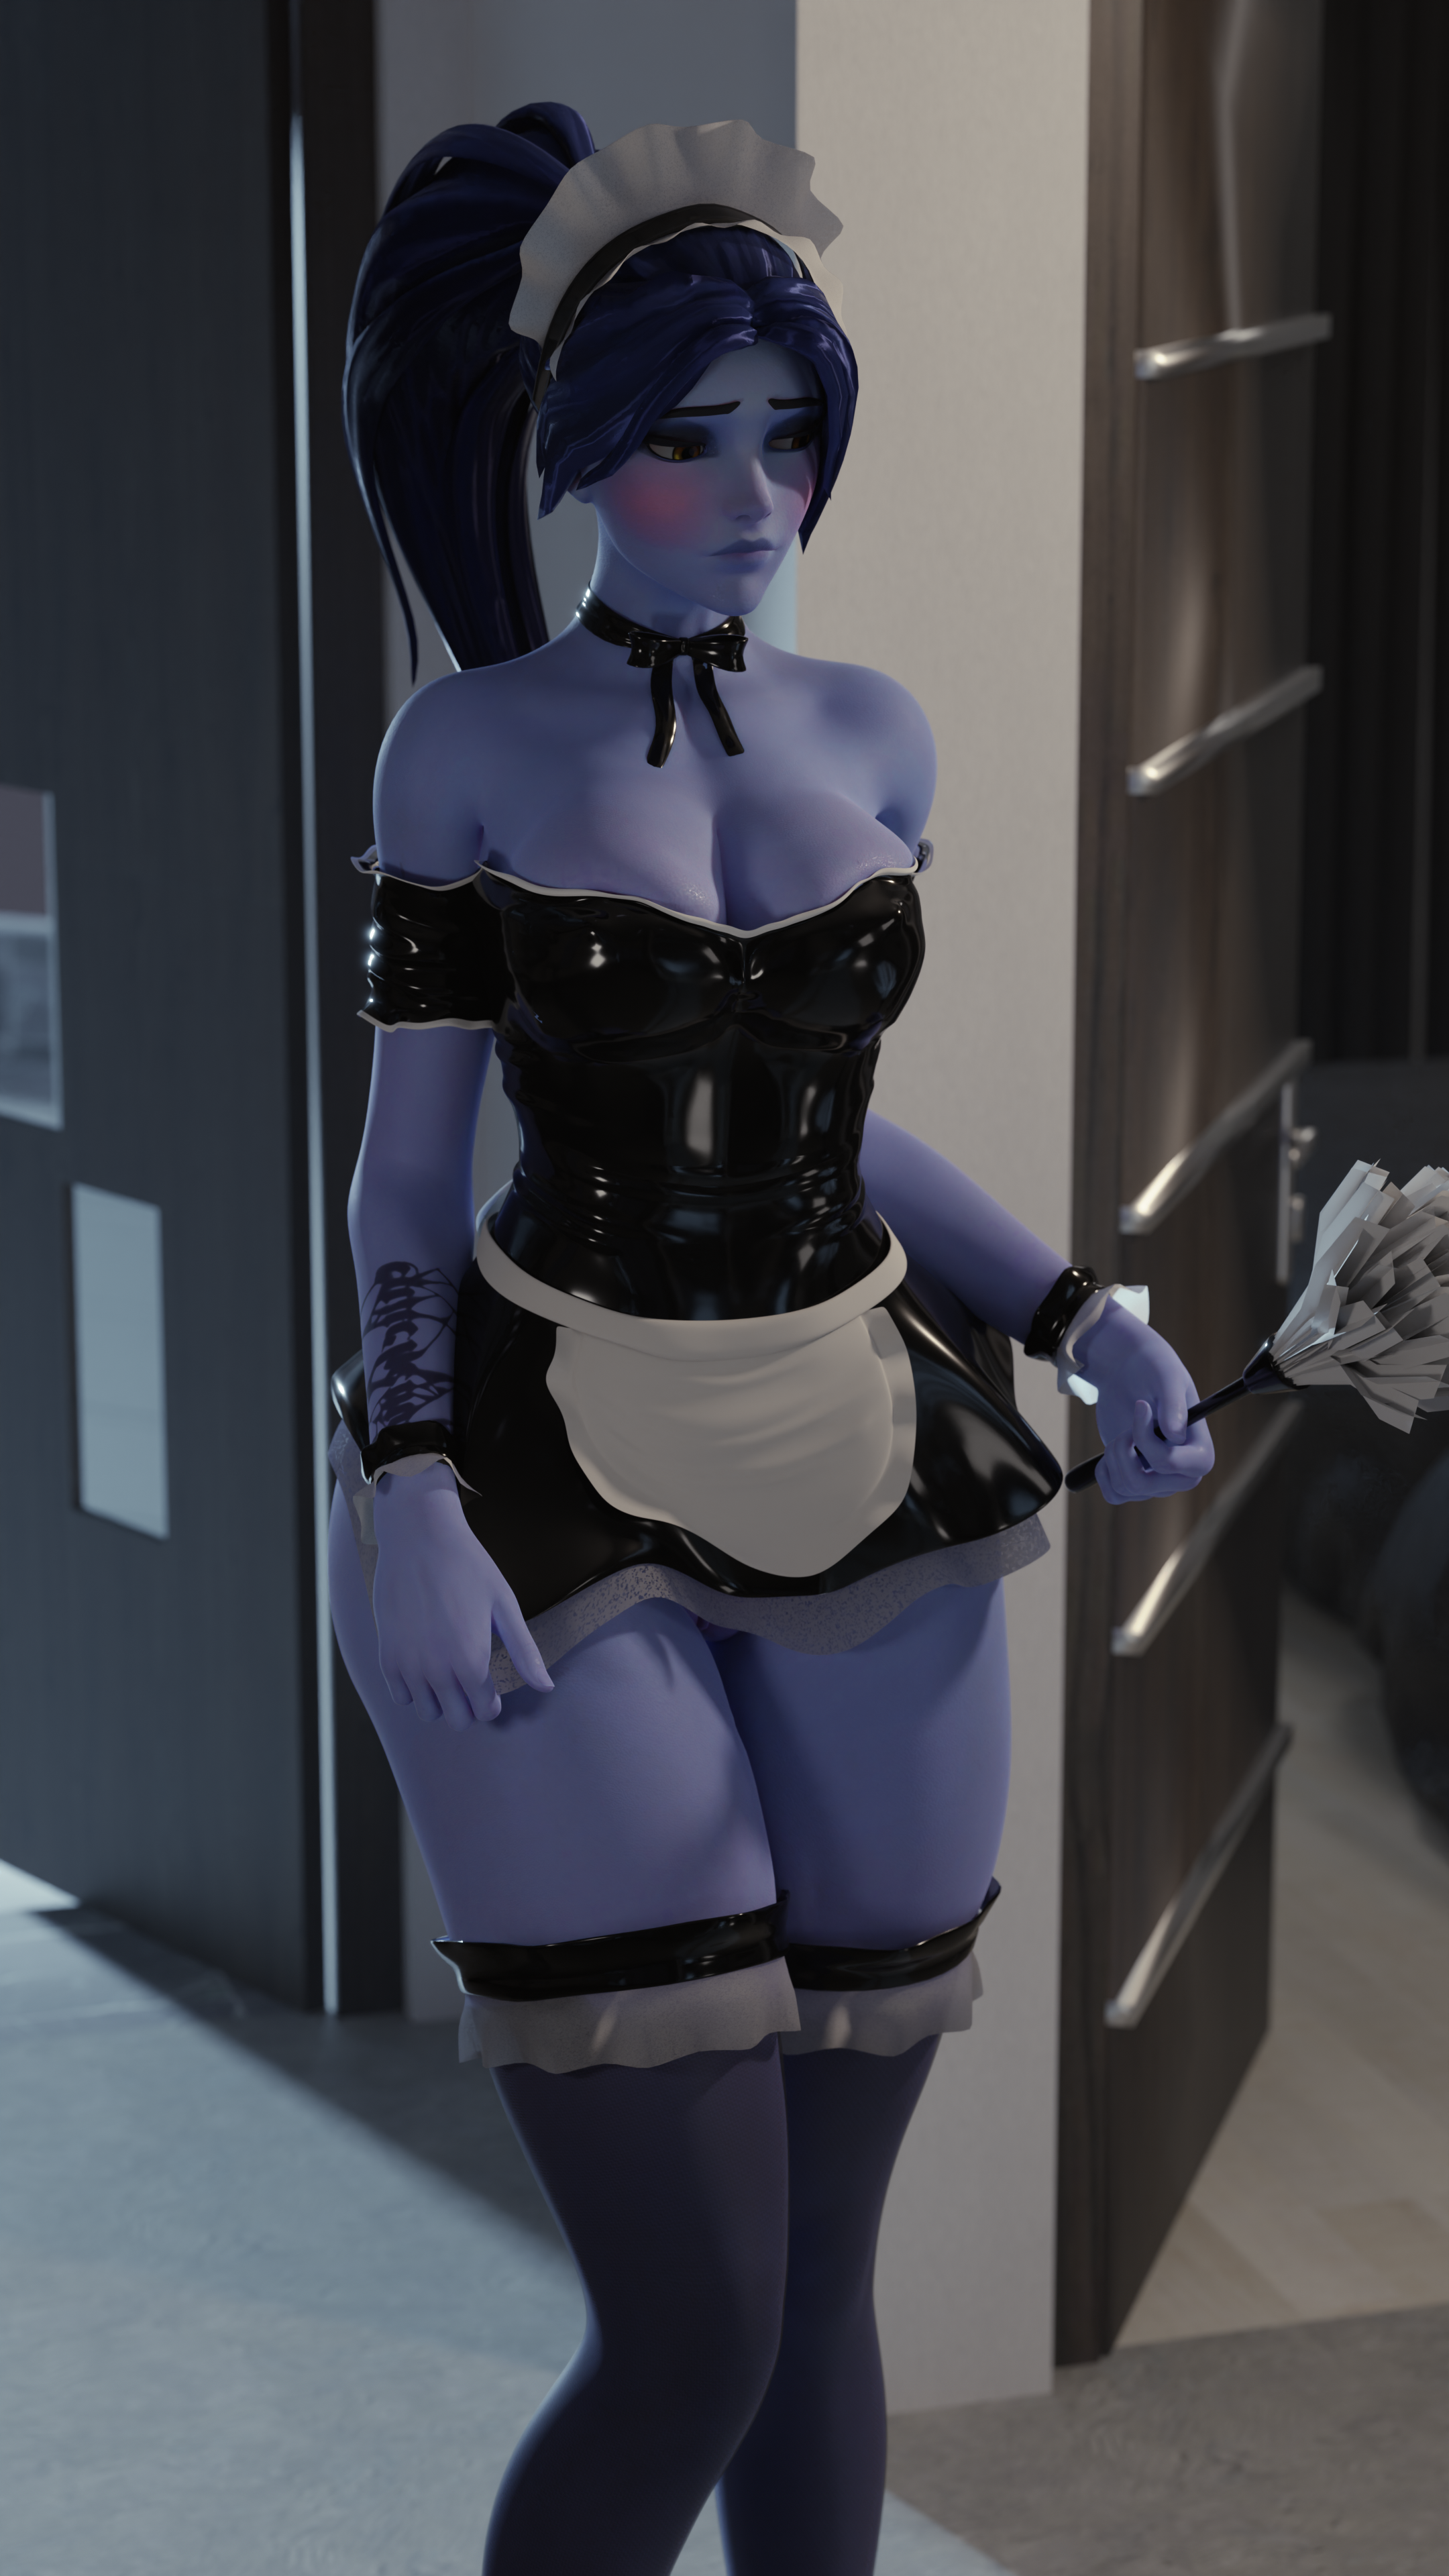 General 2160x3840 Overwatch Widowmaker (Overwatch) boobs long hair thick thigh maid outfit portrait display maid video game characters CGI video game girls stockings video games blushing